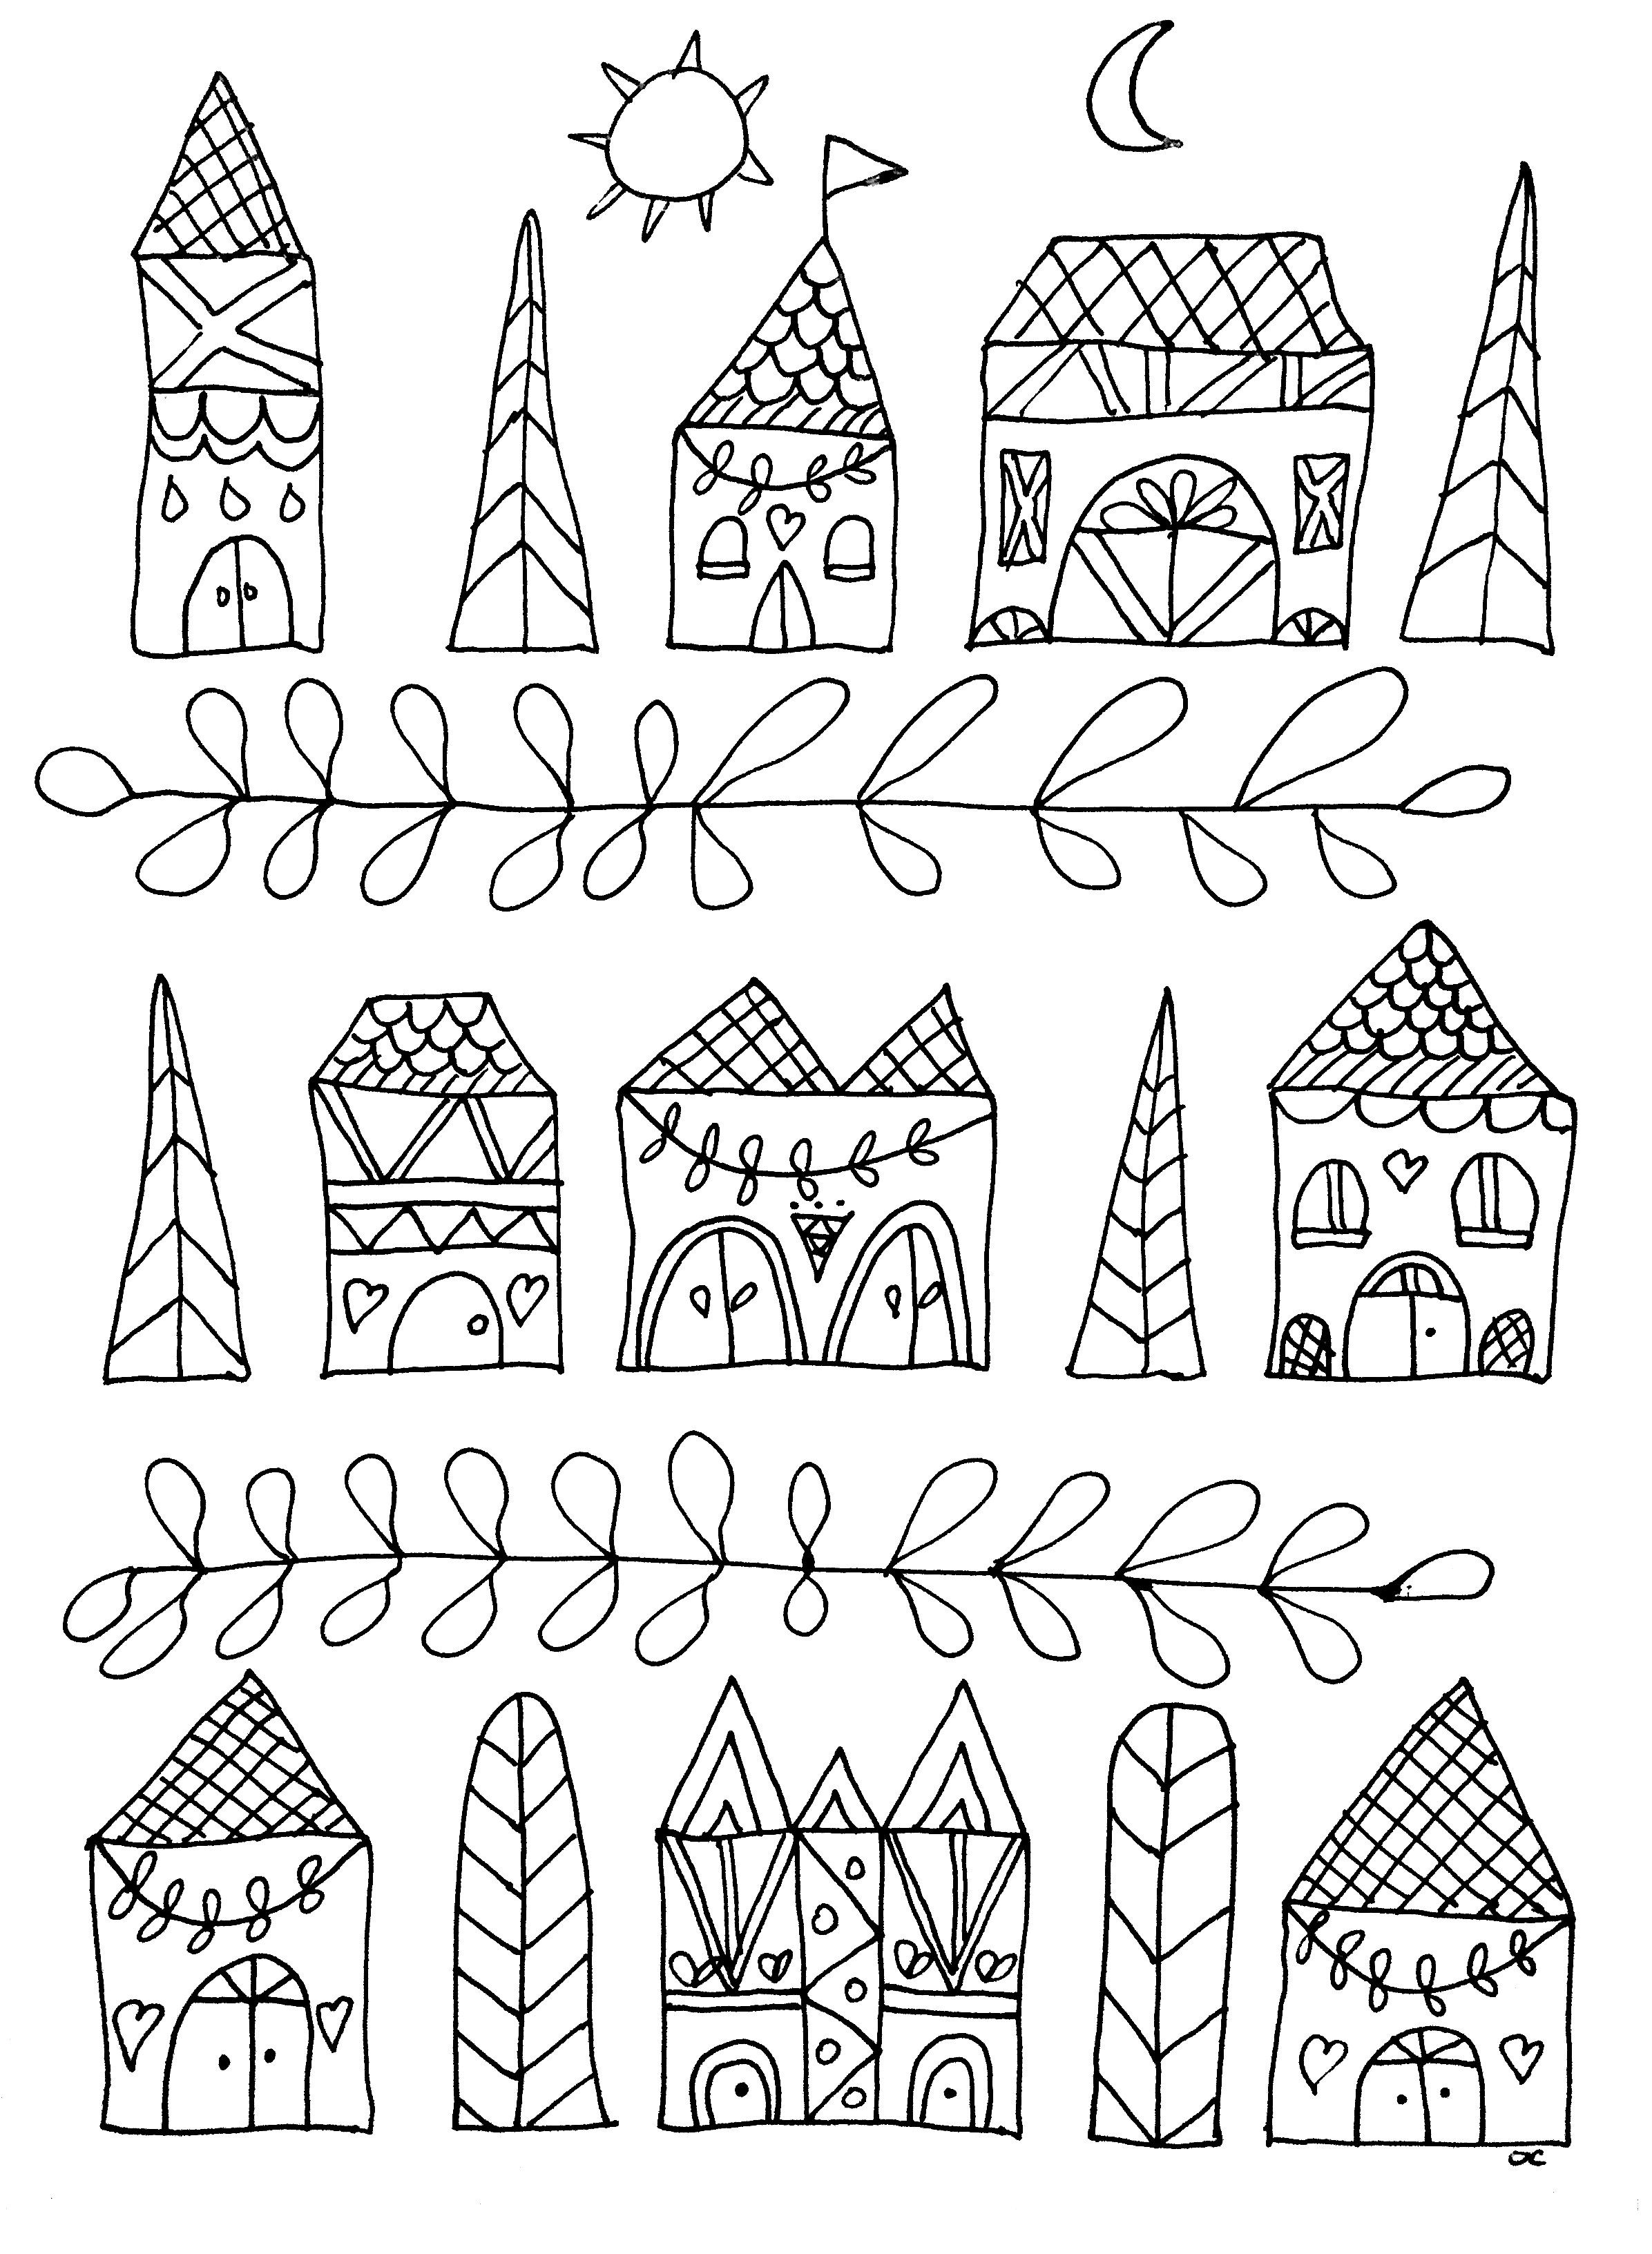 free houses clipart simple house design